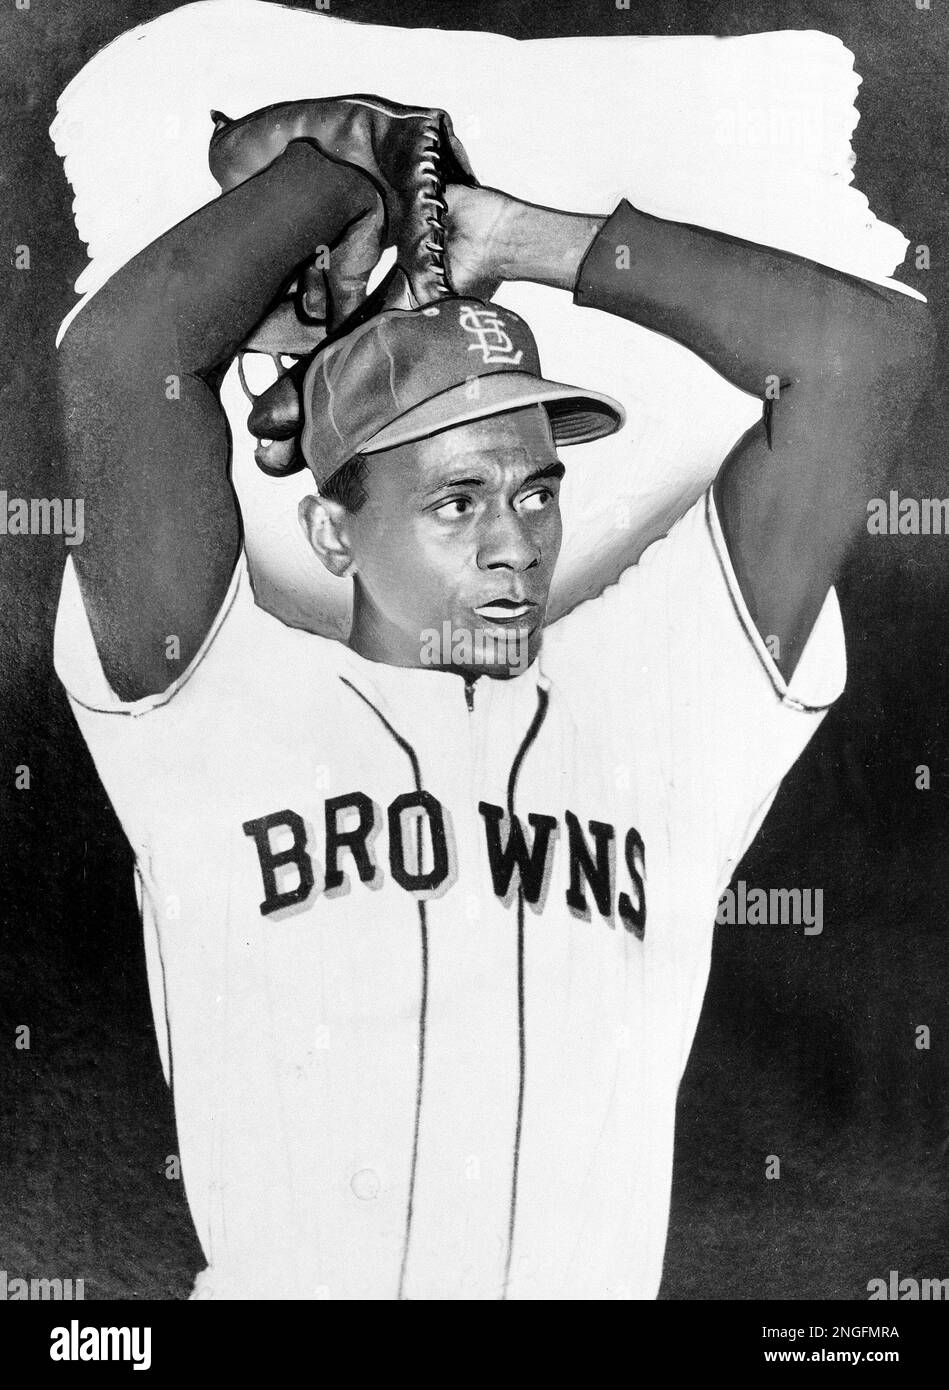 Satchel Paige, the ageless right-handed pitching star, returns to major  league baseball starting for the Browns in St. Louis, on July 19, 1951.  Here he is seen warming up prior to a